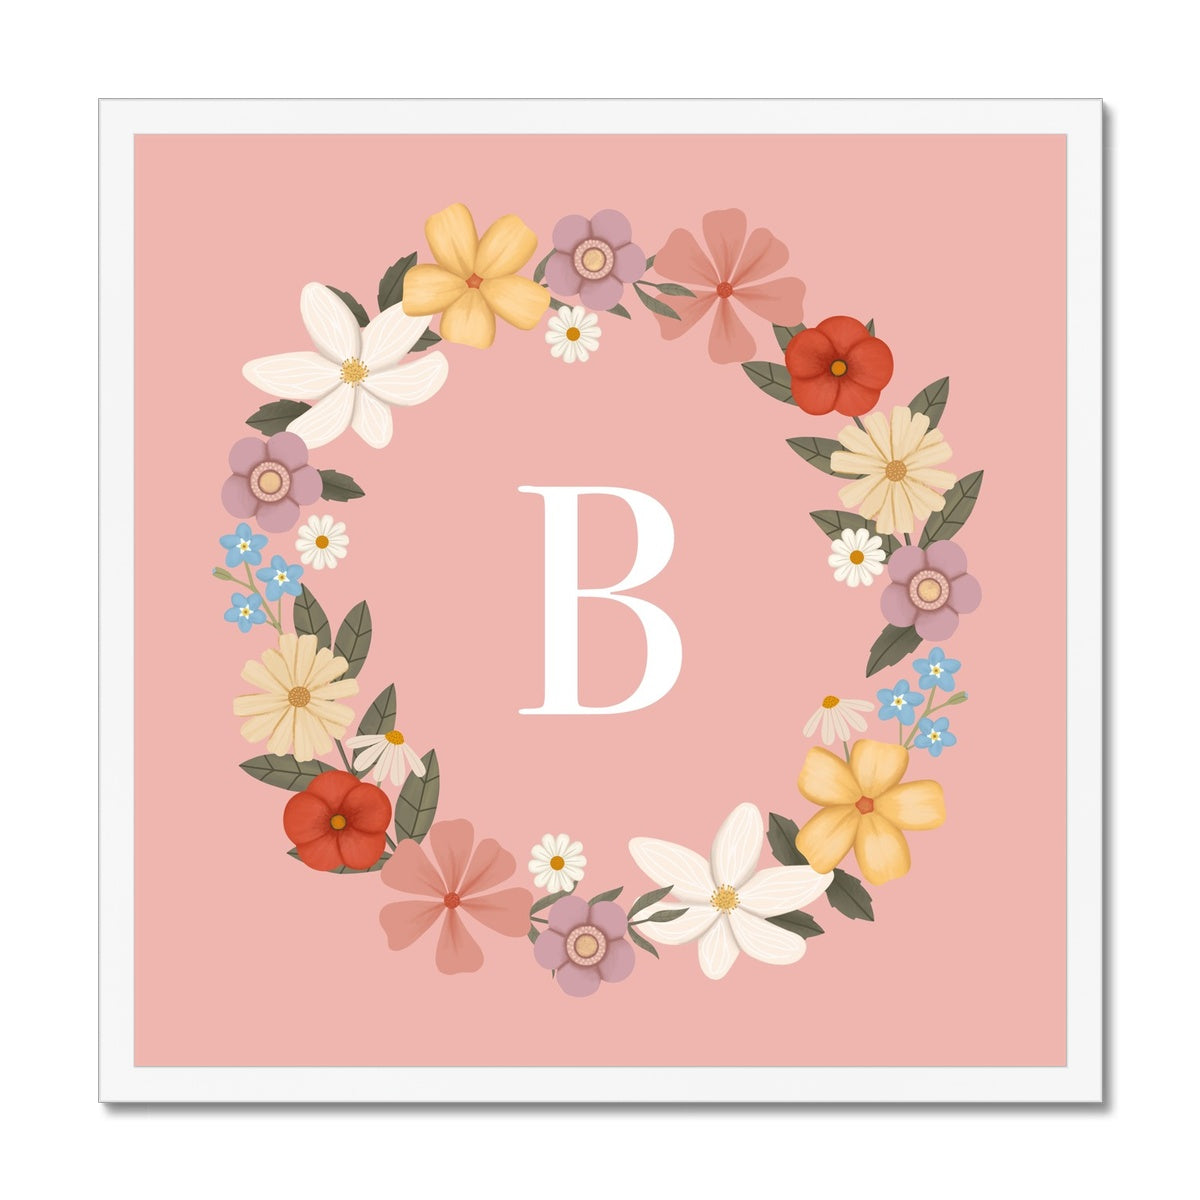 Personalised Floral Wreath in pink / Framed Print